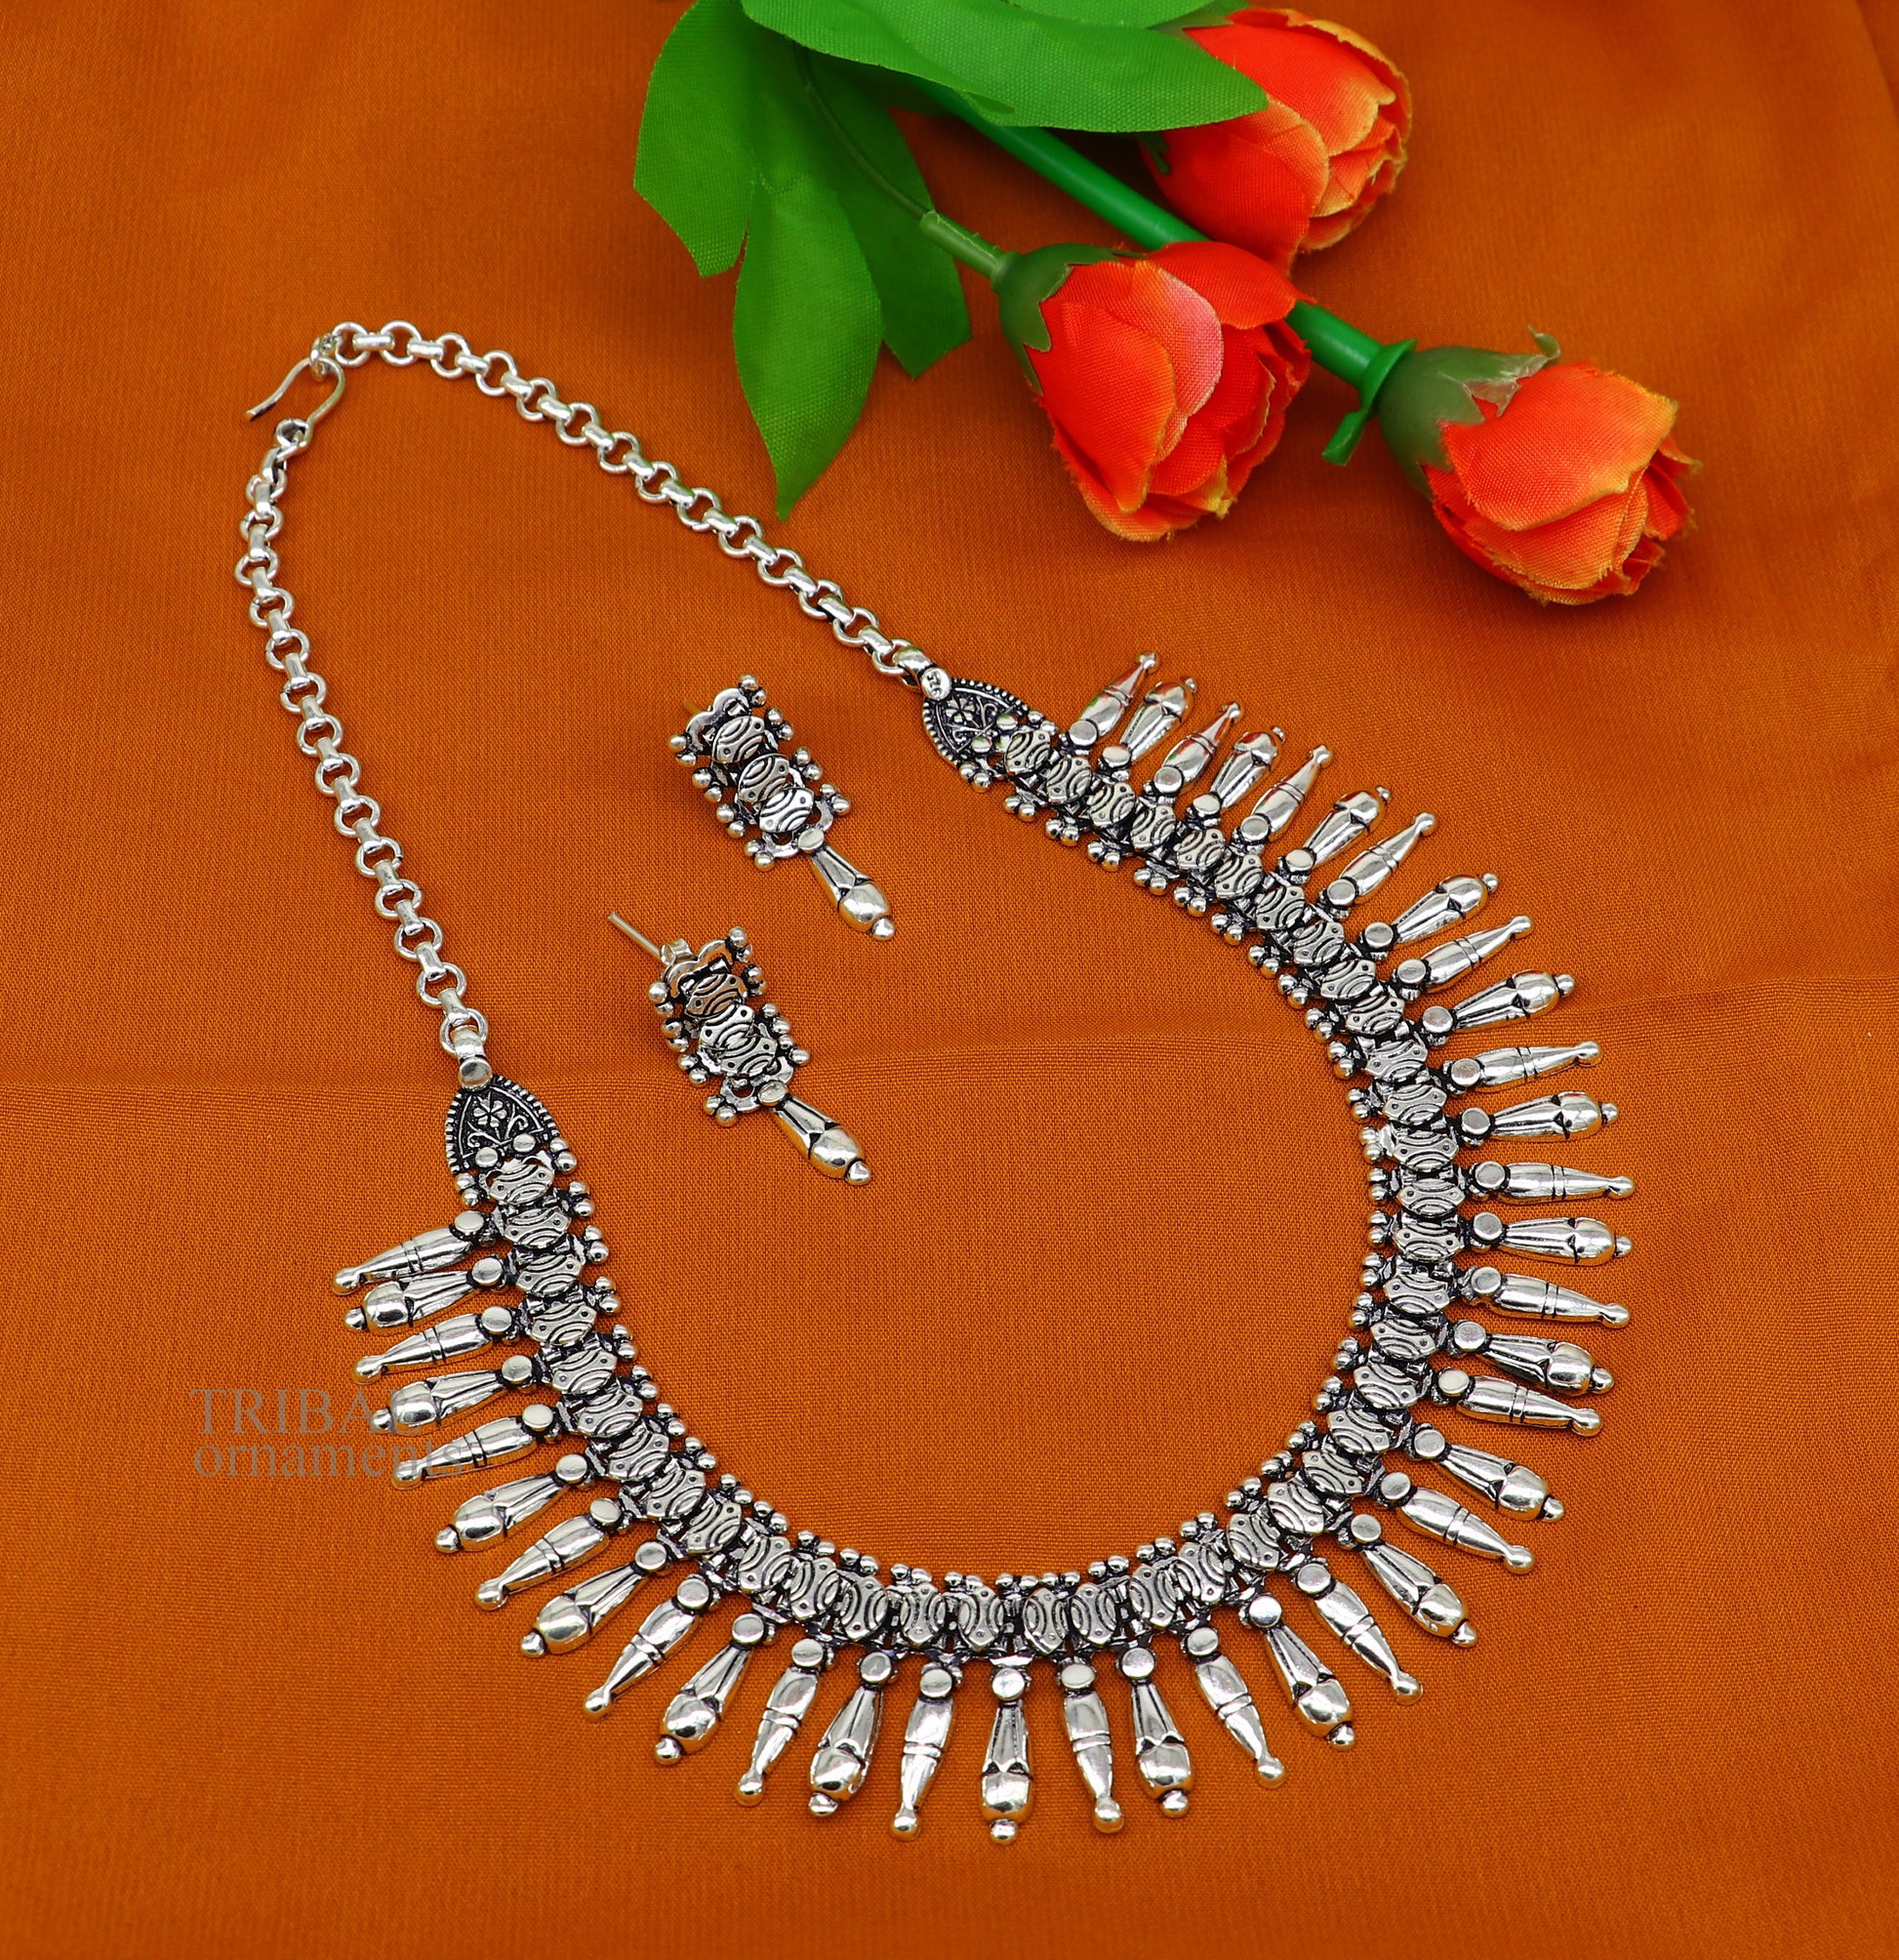 925 sterling silver designer traditional necklace excellent gifting tribal brides belly dance wedding jewelry india nec286 - TRIBAL ORNAMENTS